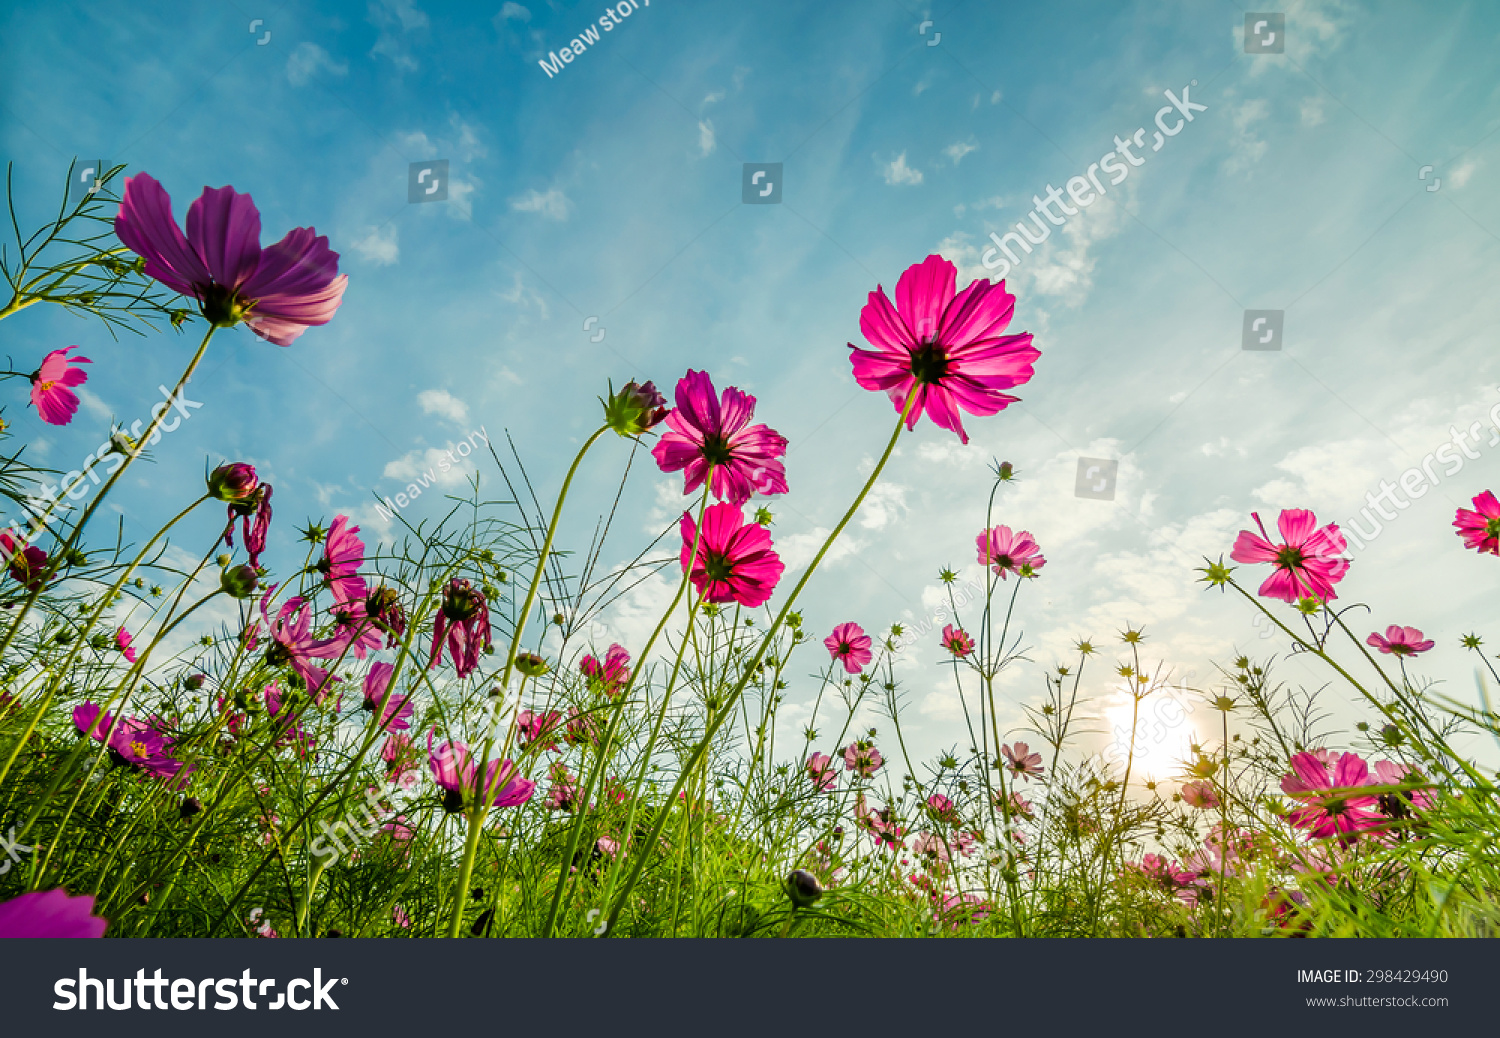 Purple, pink, red, cosmos flowers in the garden with  blue sky and clouds background in vintage style soft focus. #298429490